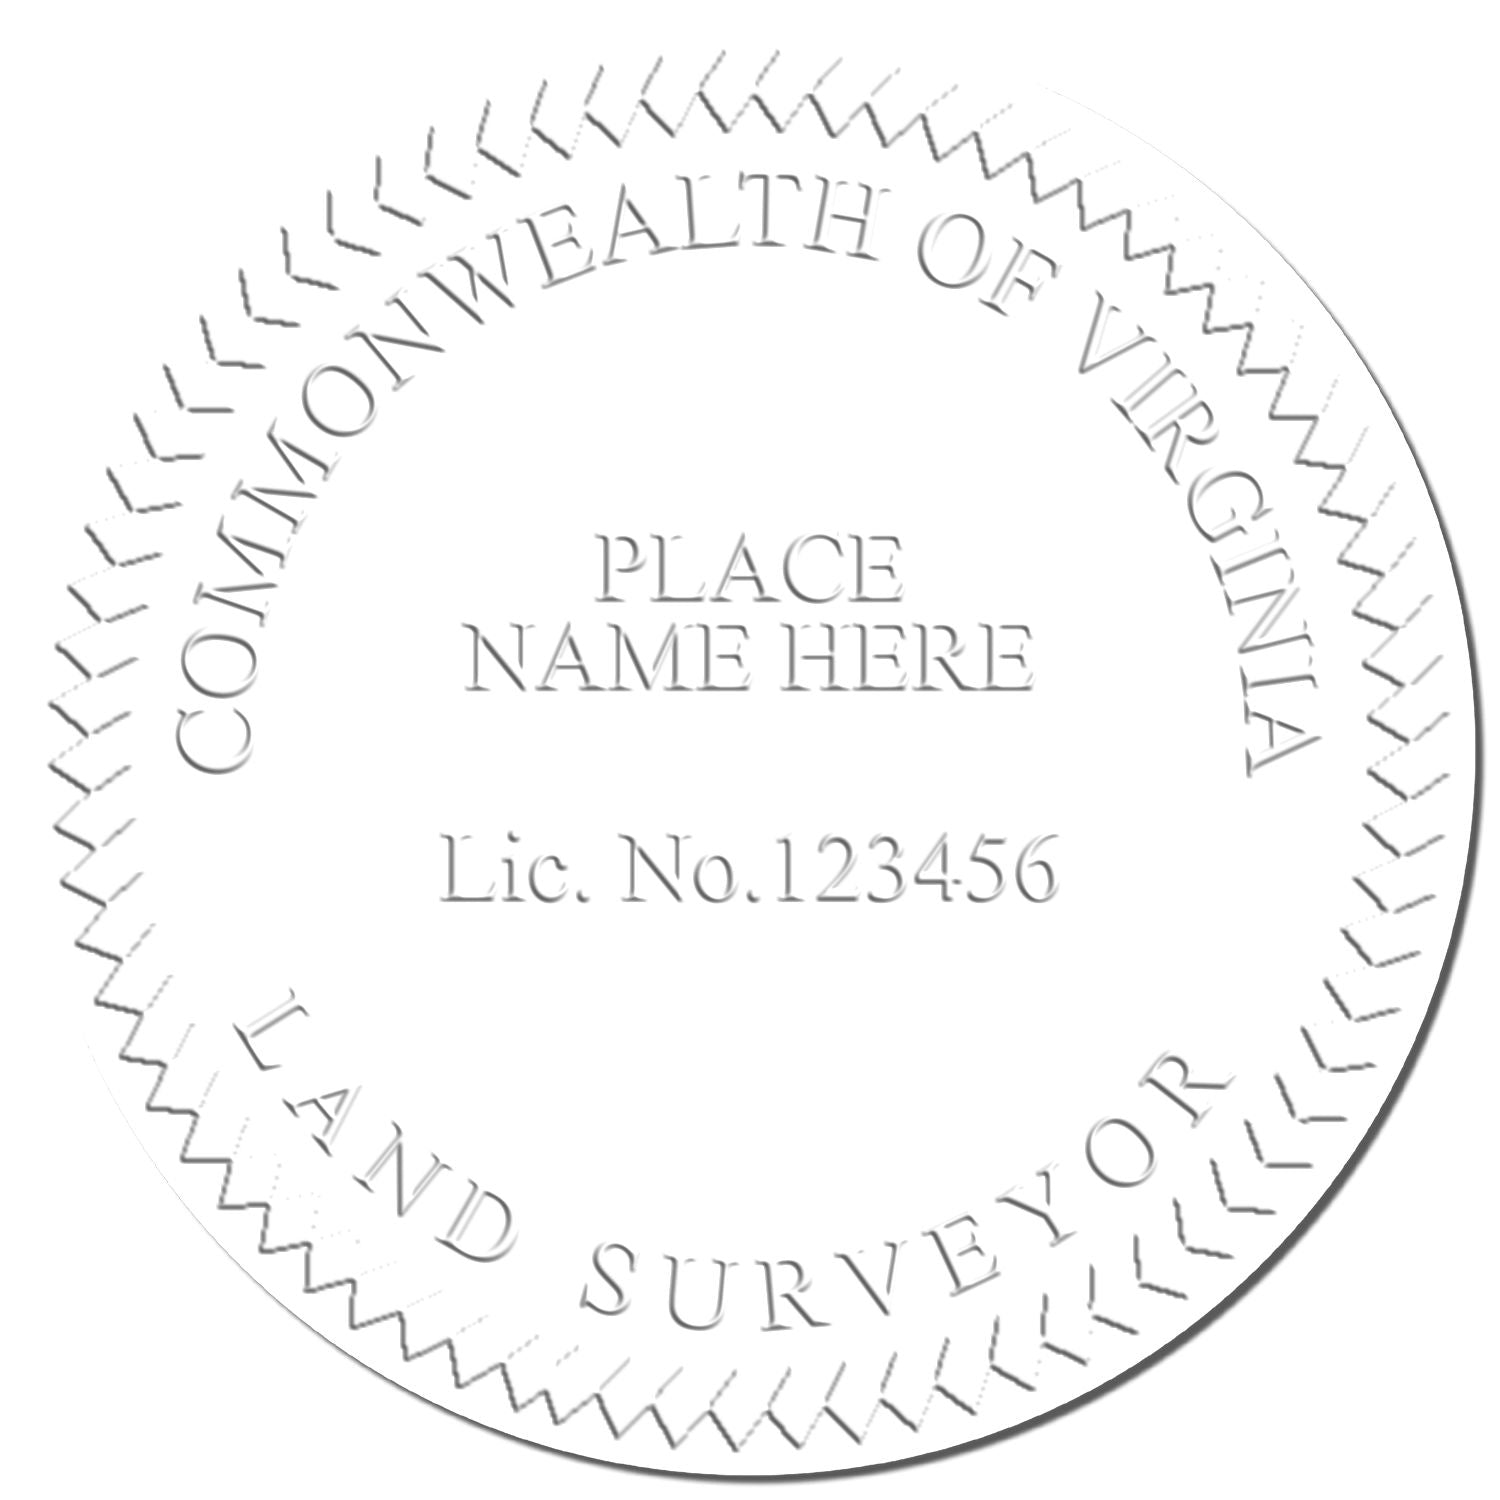 This paper is stamped with a sample imprint of the Handheld Virginia Land Surveyor Seal, signifying its quality and reliability.